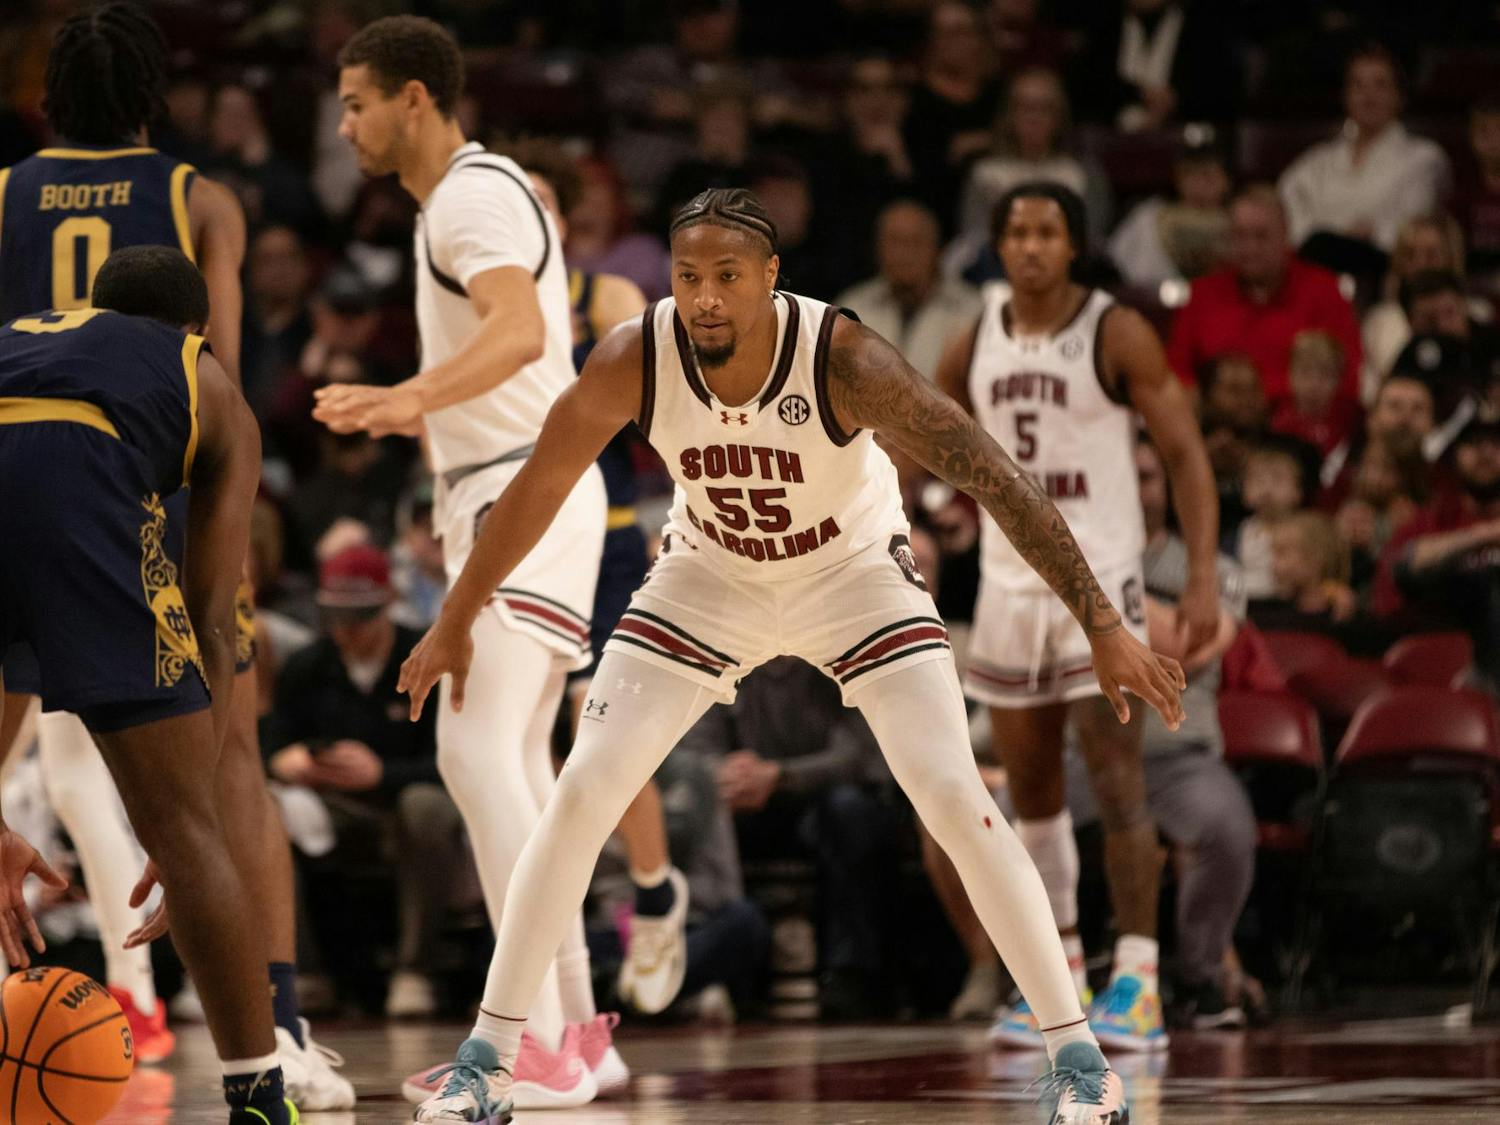 Gamecocks men's basketball continued its strong start Monday night with a 65-53 win against Notre Dame. For the first time since the 2016-17 season, South Carolina is undefeated through six games. Junior guard Meechie Johnson was the star of the game, scoring a career-high 29 points and carrying the Gamecocks to victory.